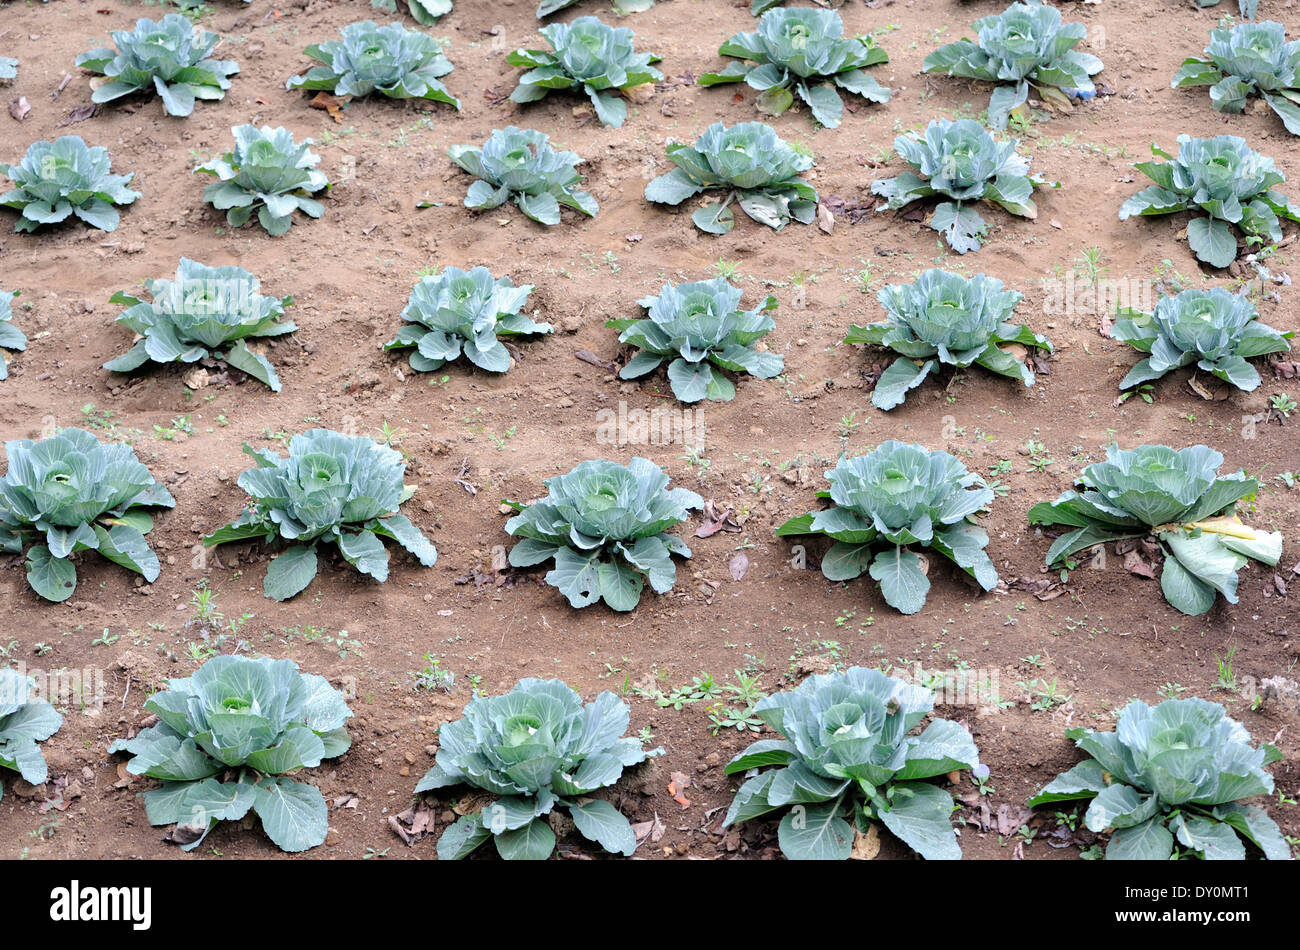 Neat row of cabbages on the slopes of Volcan San Pedro illustrate the importance of market gardening in this area. Stock Photo